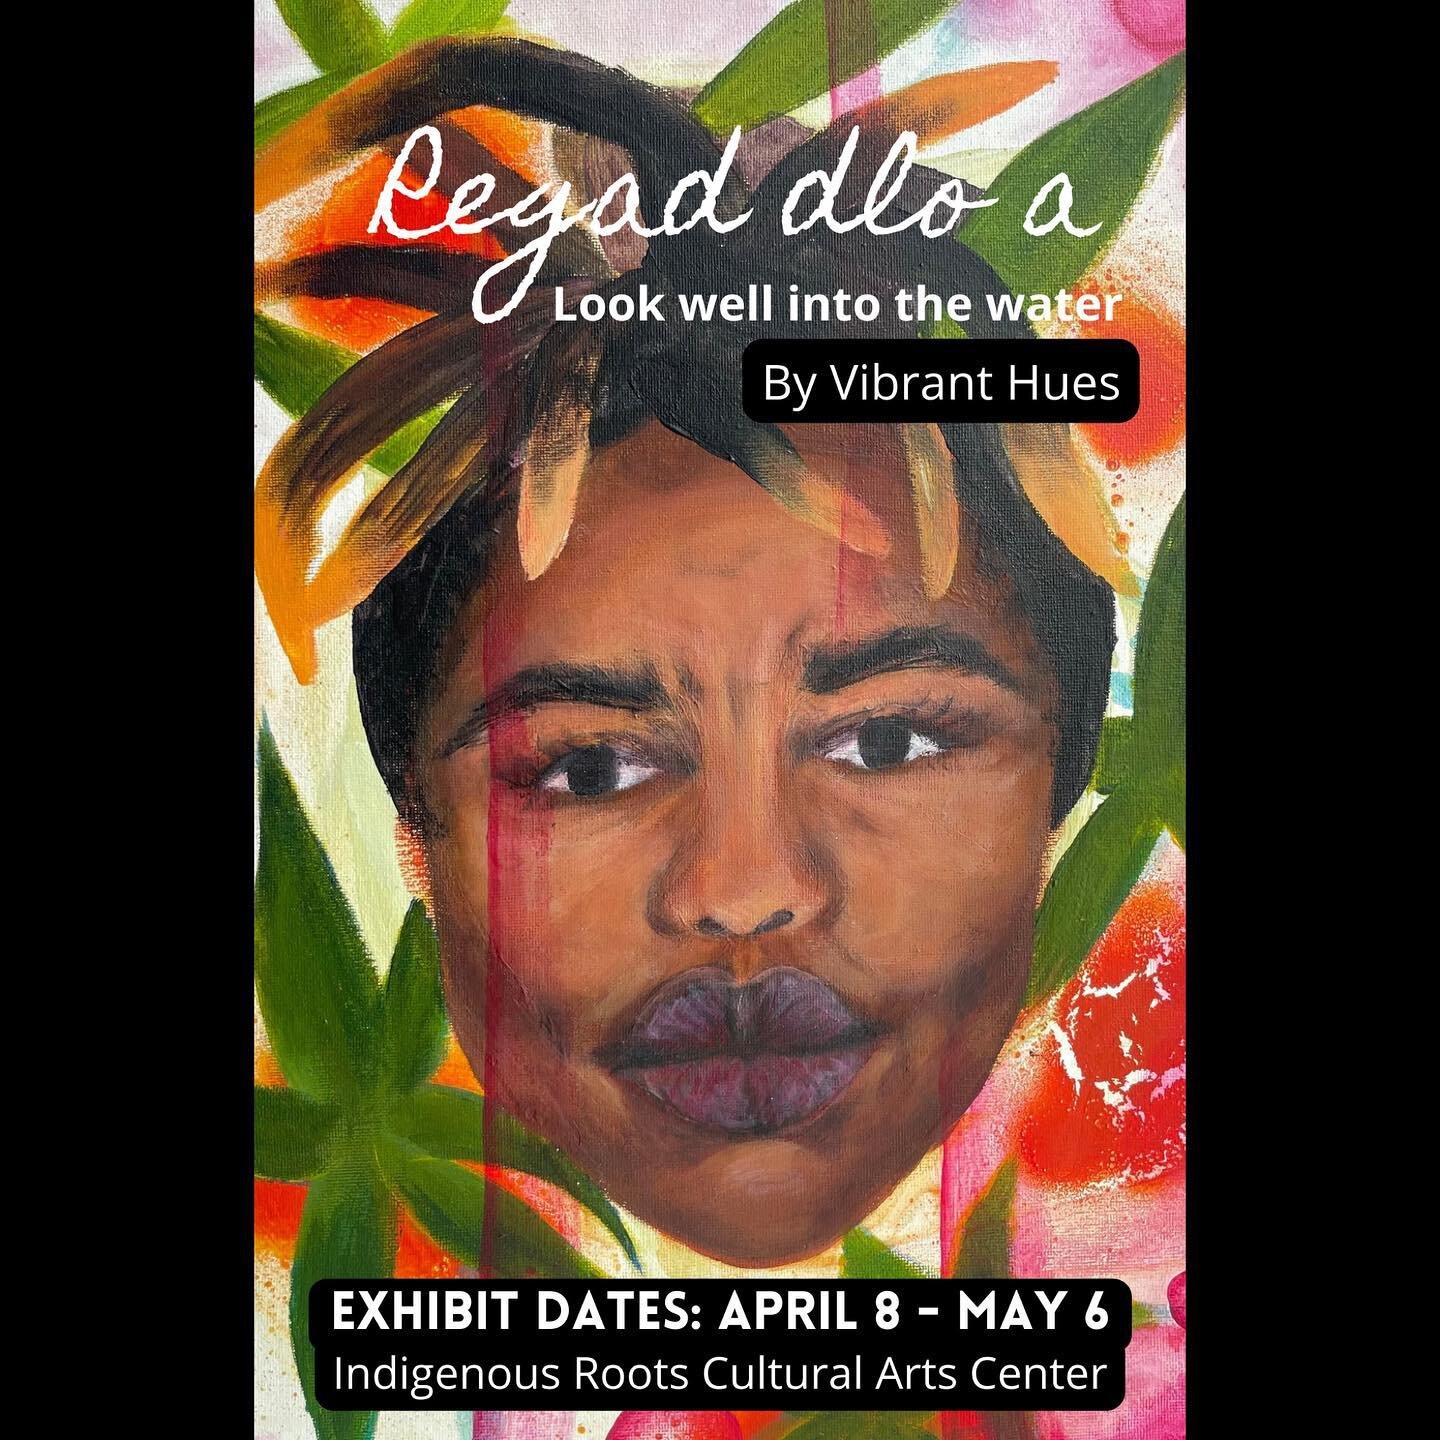 We are excited to collaborate with Athena Estime @vibranthues__ for our next exhibit opening this Friday, April 6th!

Vibrant hues (Athena Estime) has created 12 pieces of art for Regad dlo a (look well into the water).

This exhibition is centered a